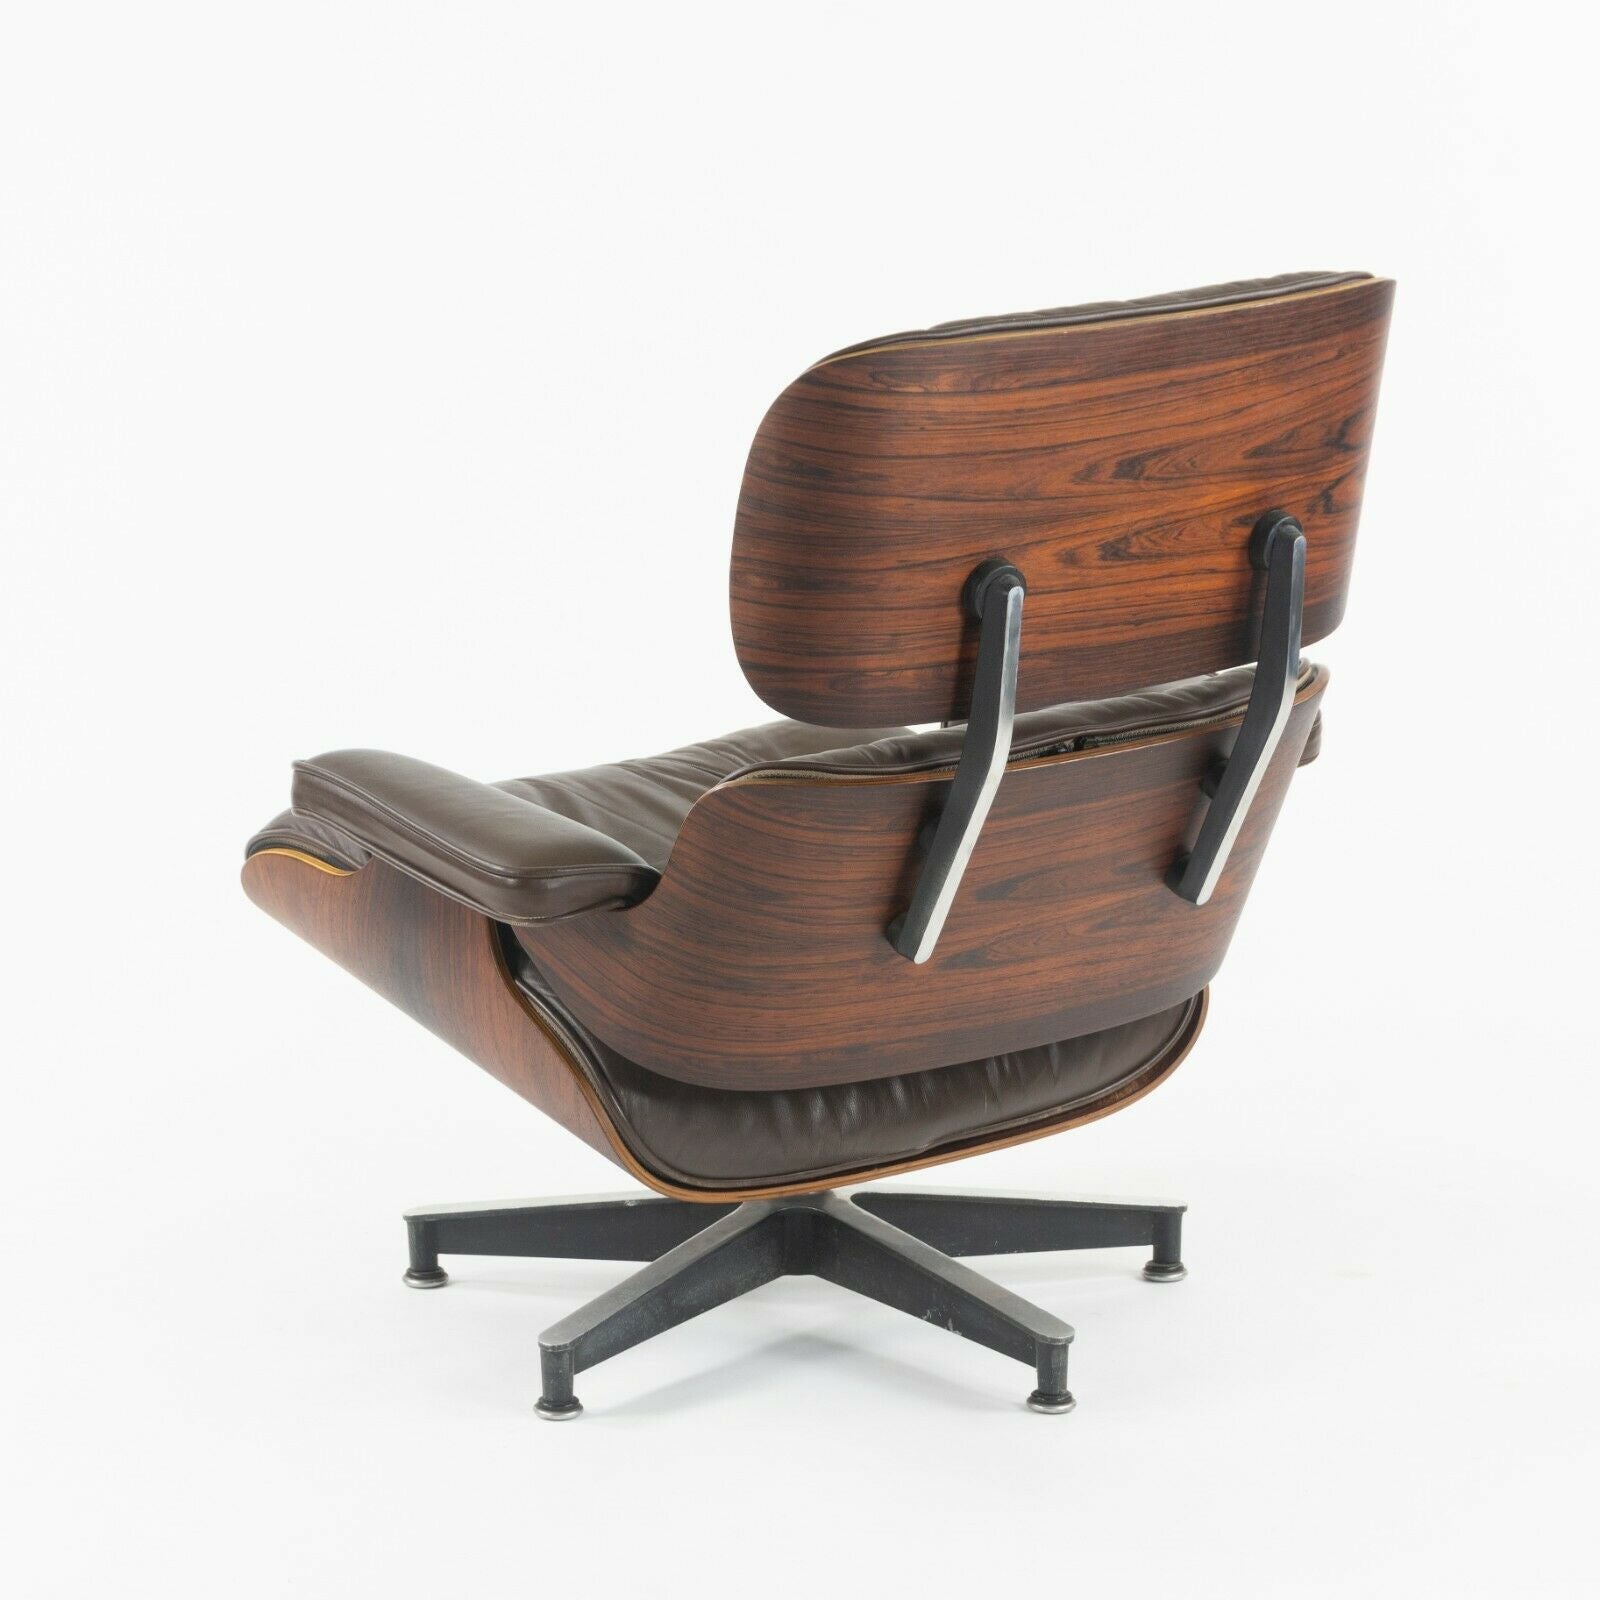 SOLD C. 1961 Herman Miller Eames Lounge Chair and Ottoman 670 and 671 Brown Leather